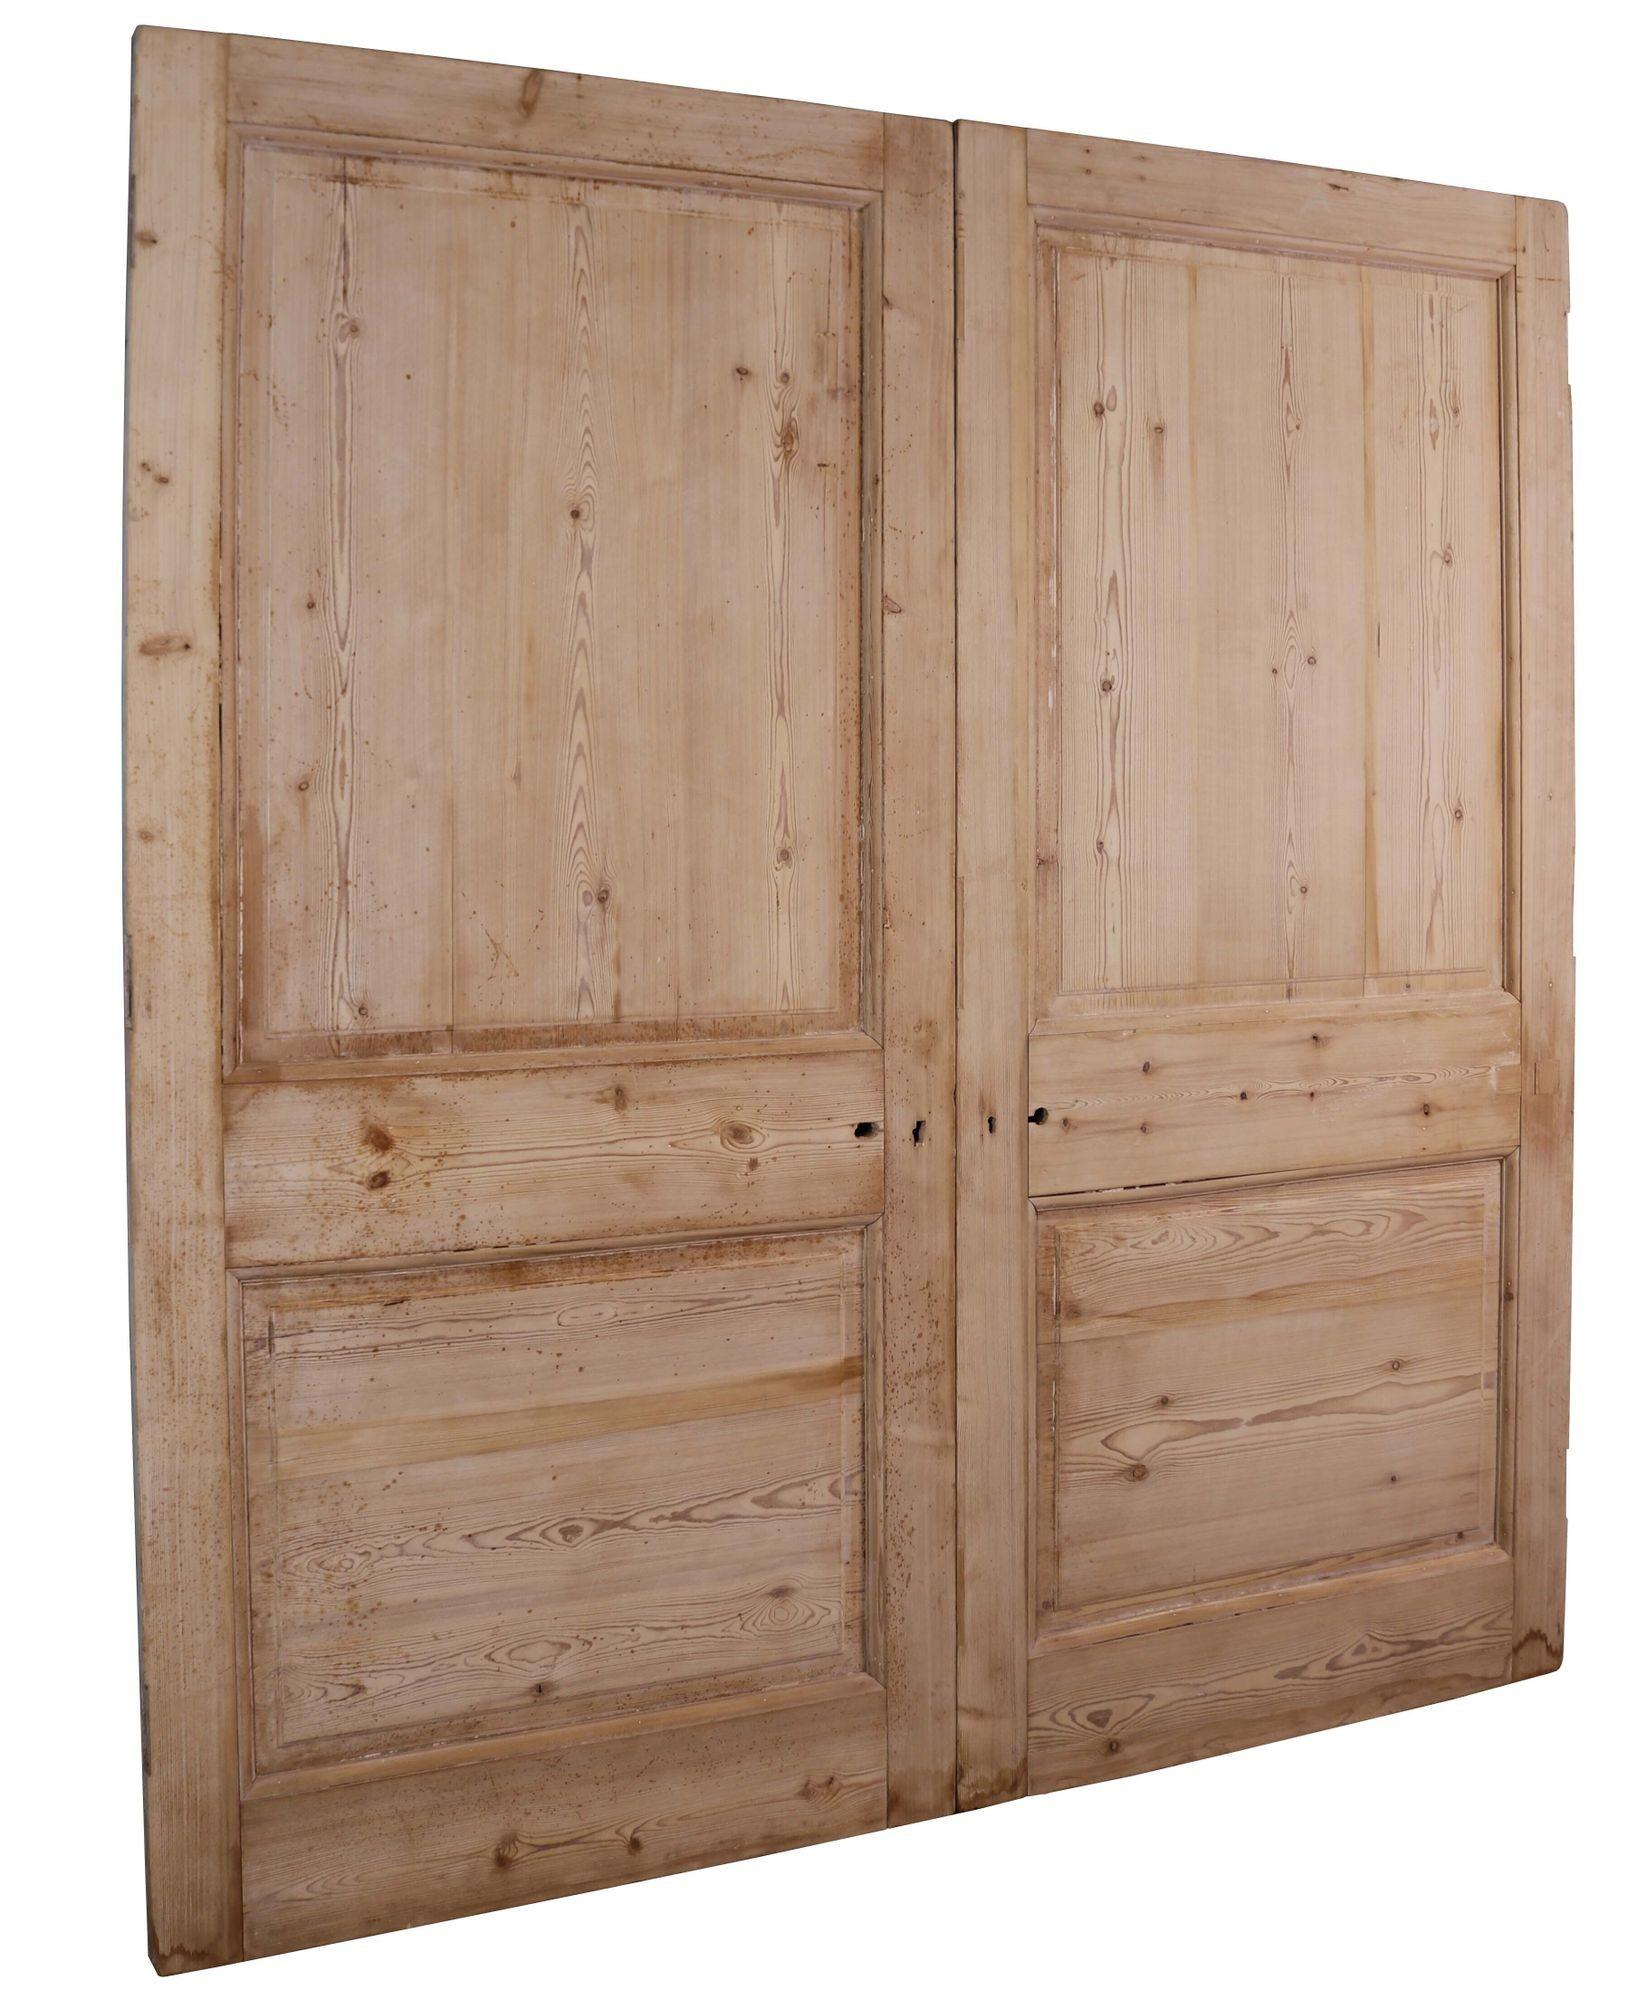 Set of reclaimed pine dividing doors. A set of antique double doors made from pine, with raised and fielded panels.